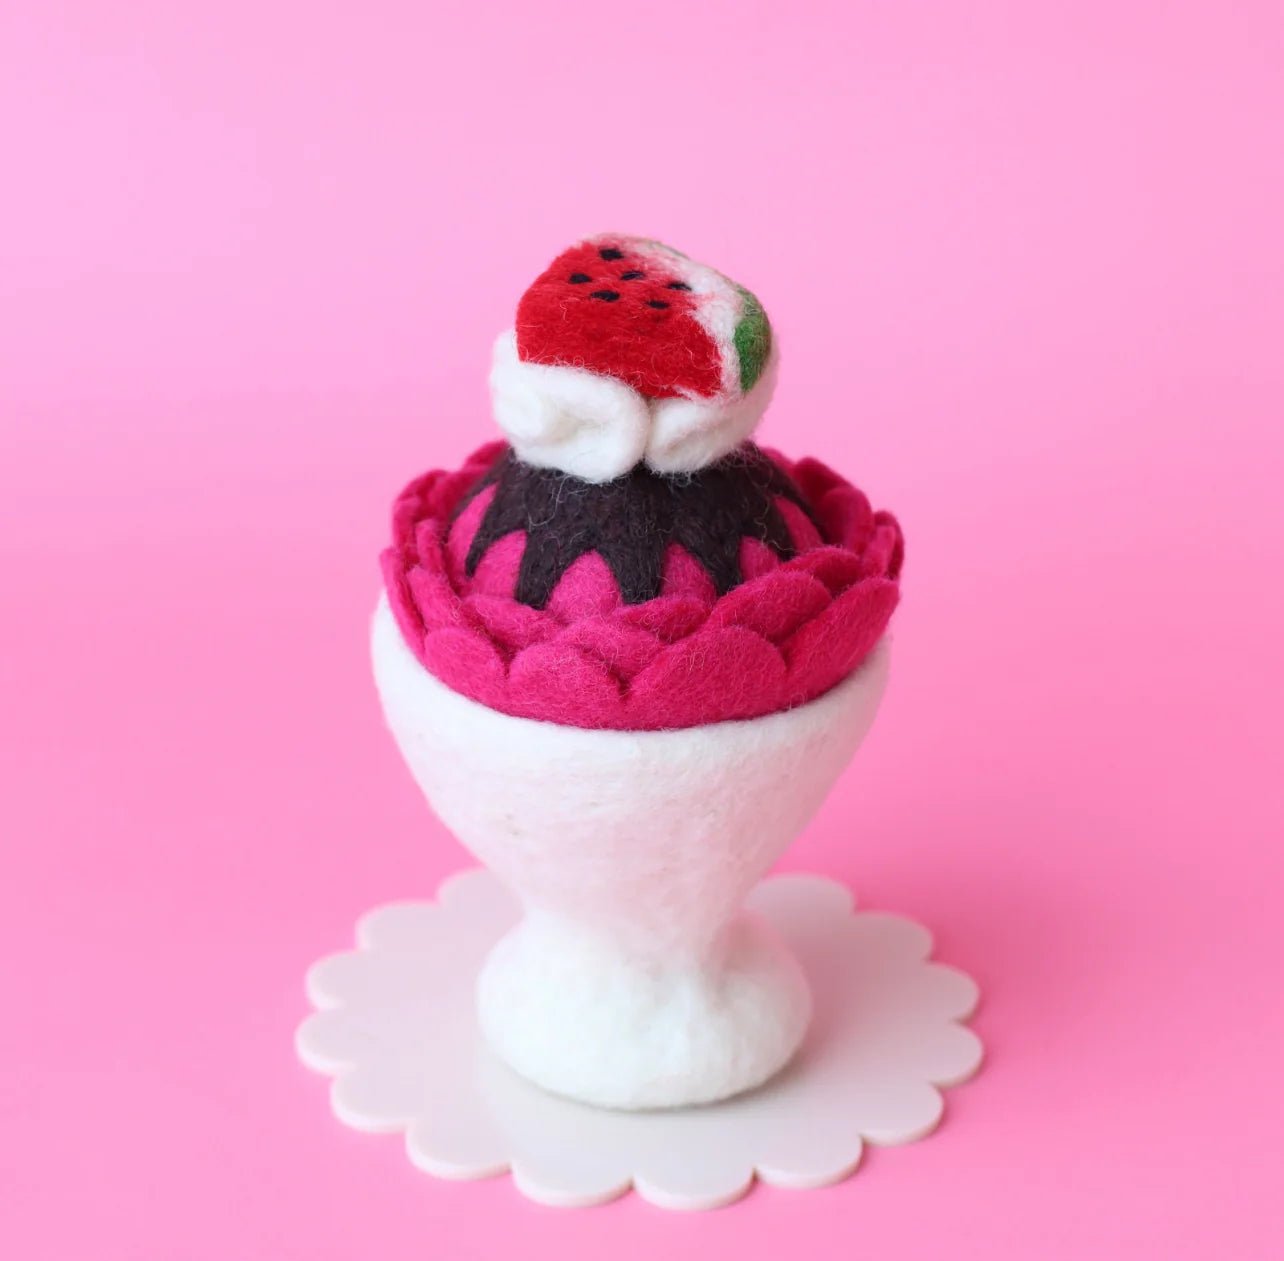 JUNI MOON | ICE-CREAM SUNDAE Watermelon w/berry topping by JUNI MOON - The Playful Collective